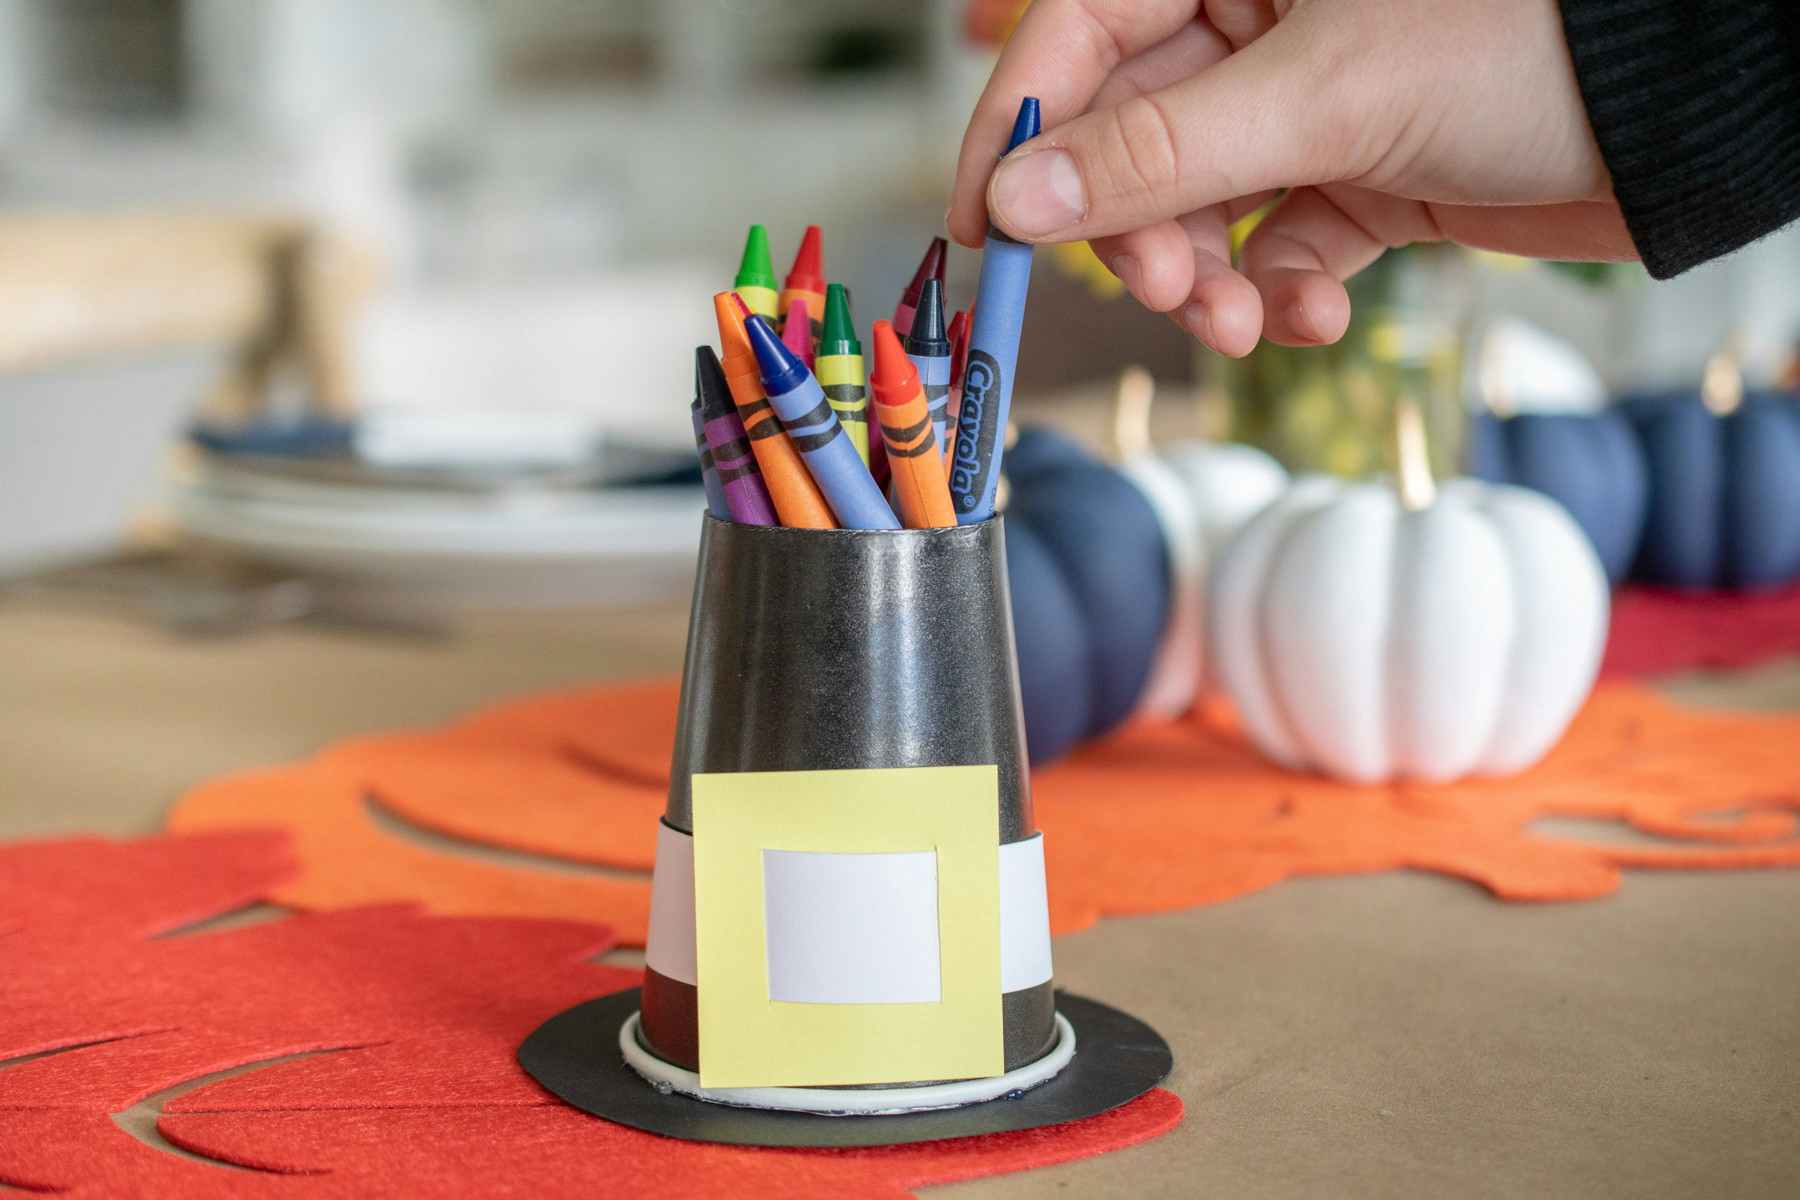 A person pulling a crayon out of a cup that looks like a pilgrims hat.